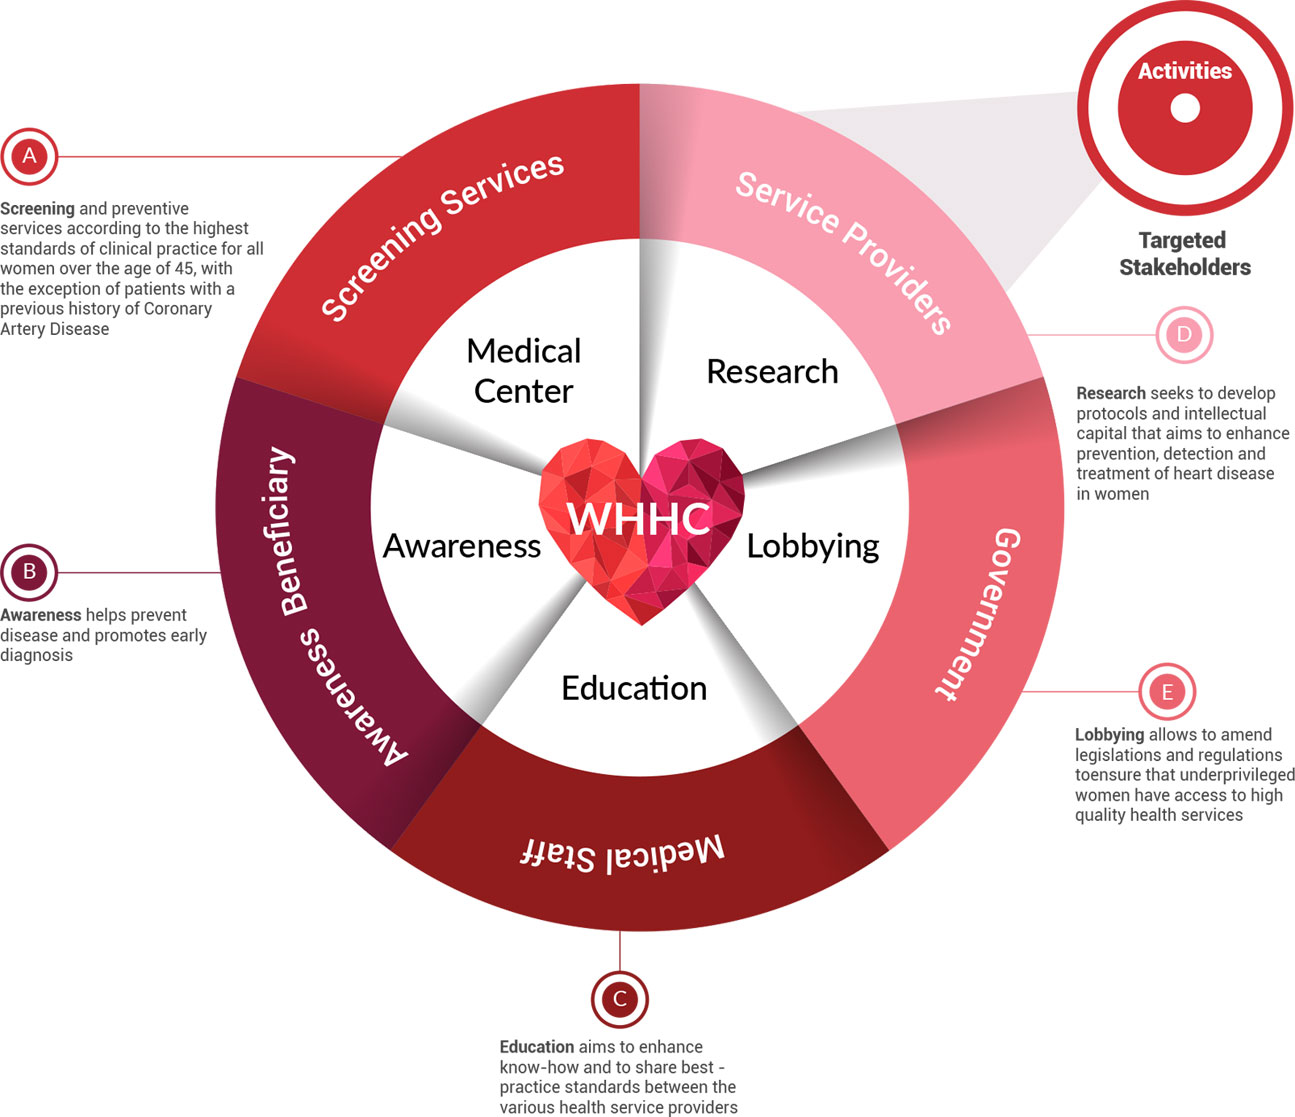 WHHC Activity Categories and Targeted Stakeholders